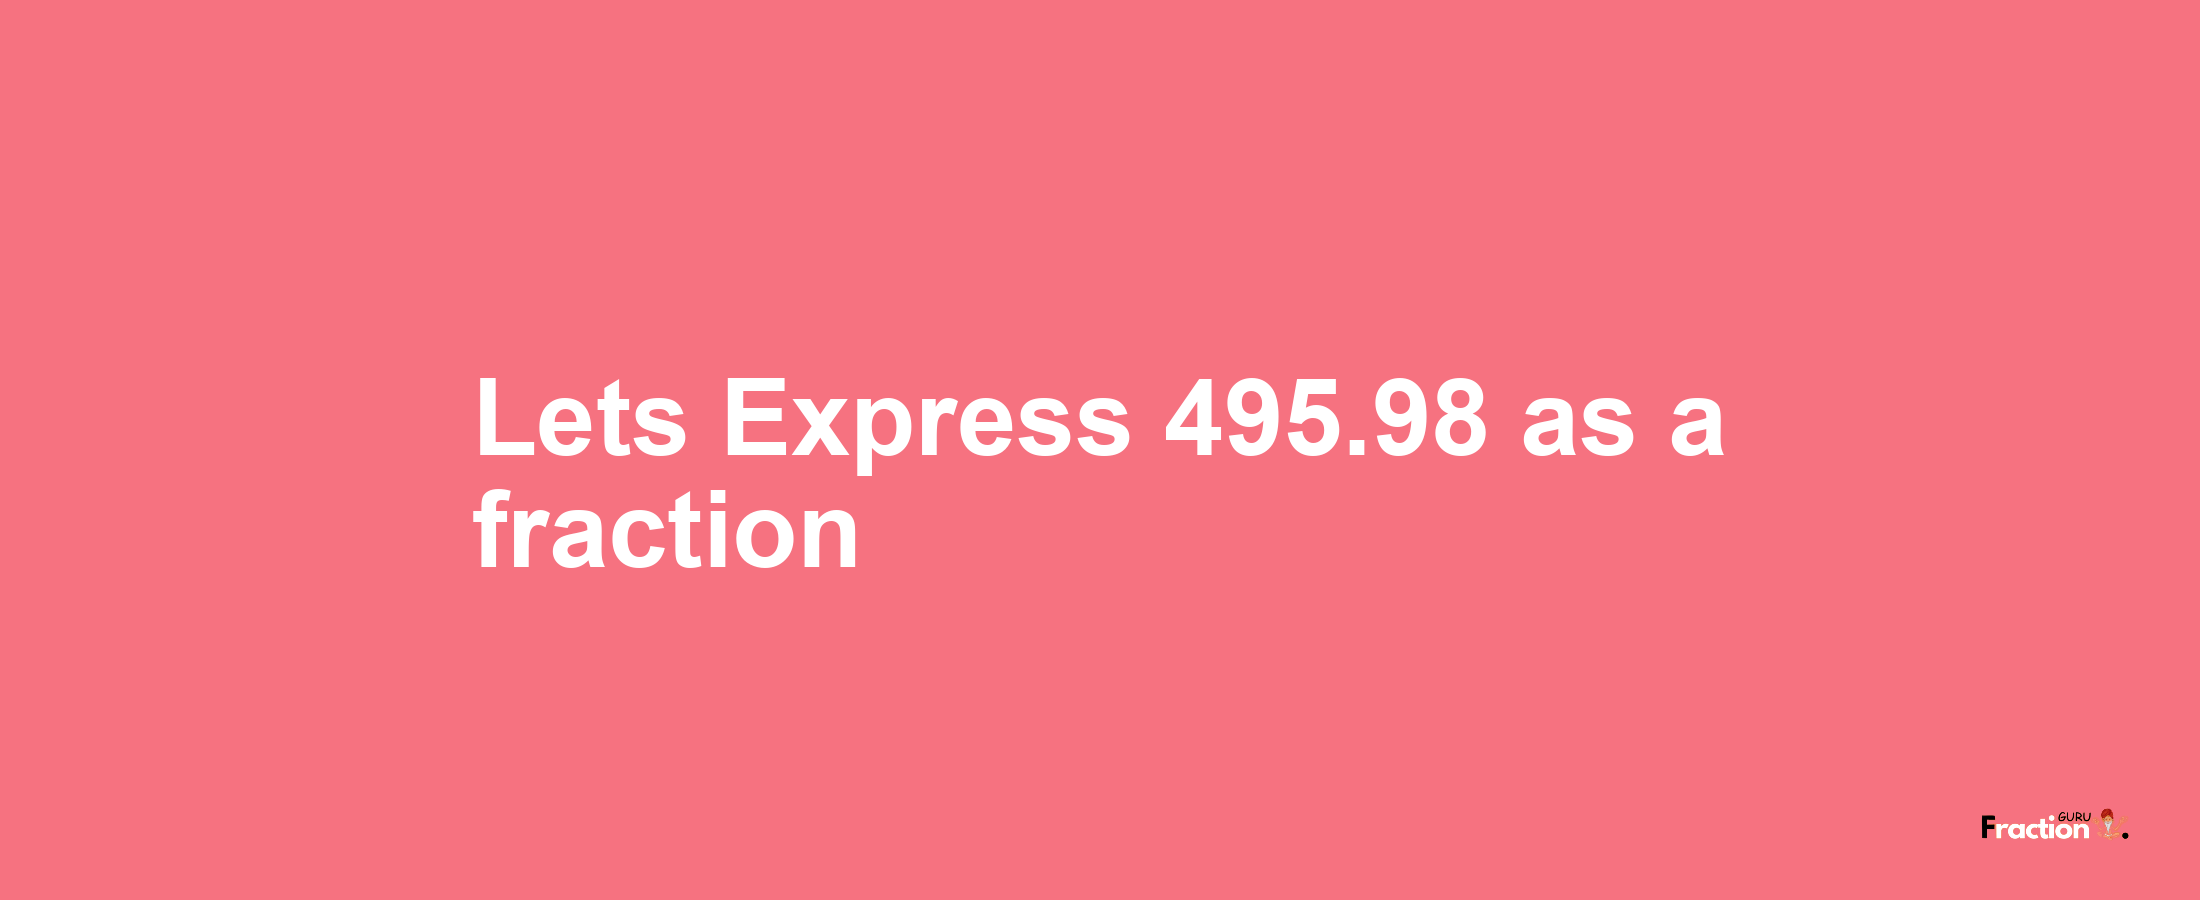 Lets Express 495.98 as afraction